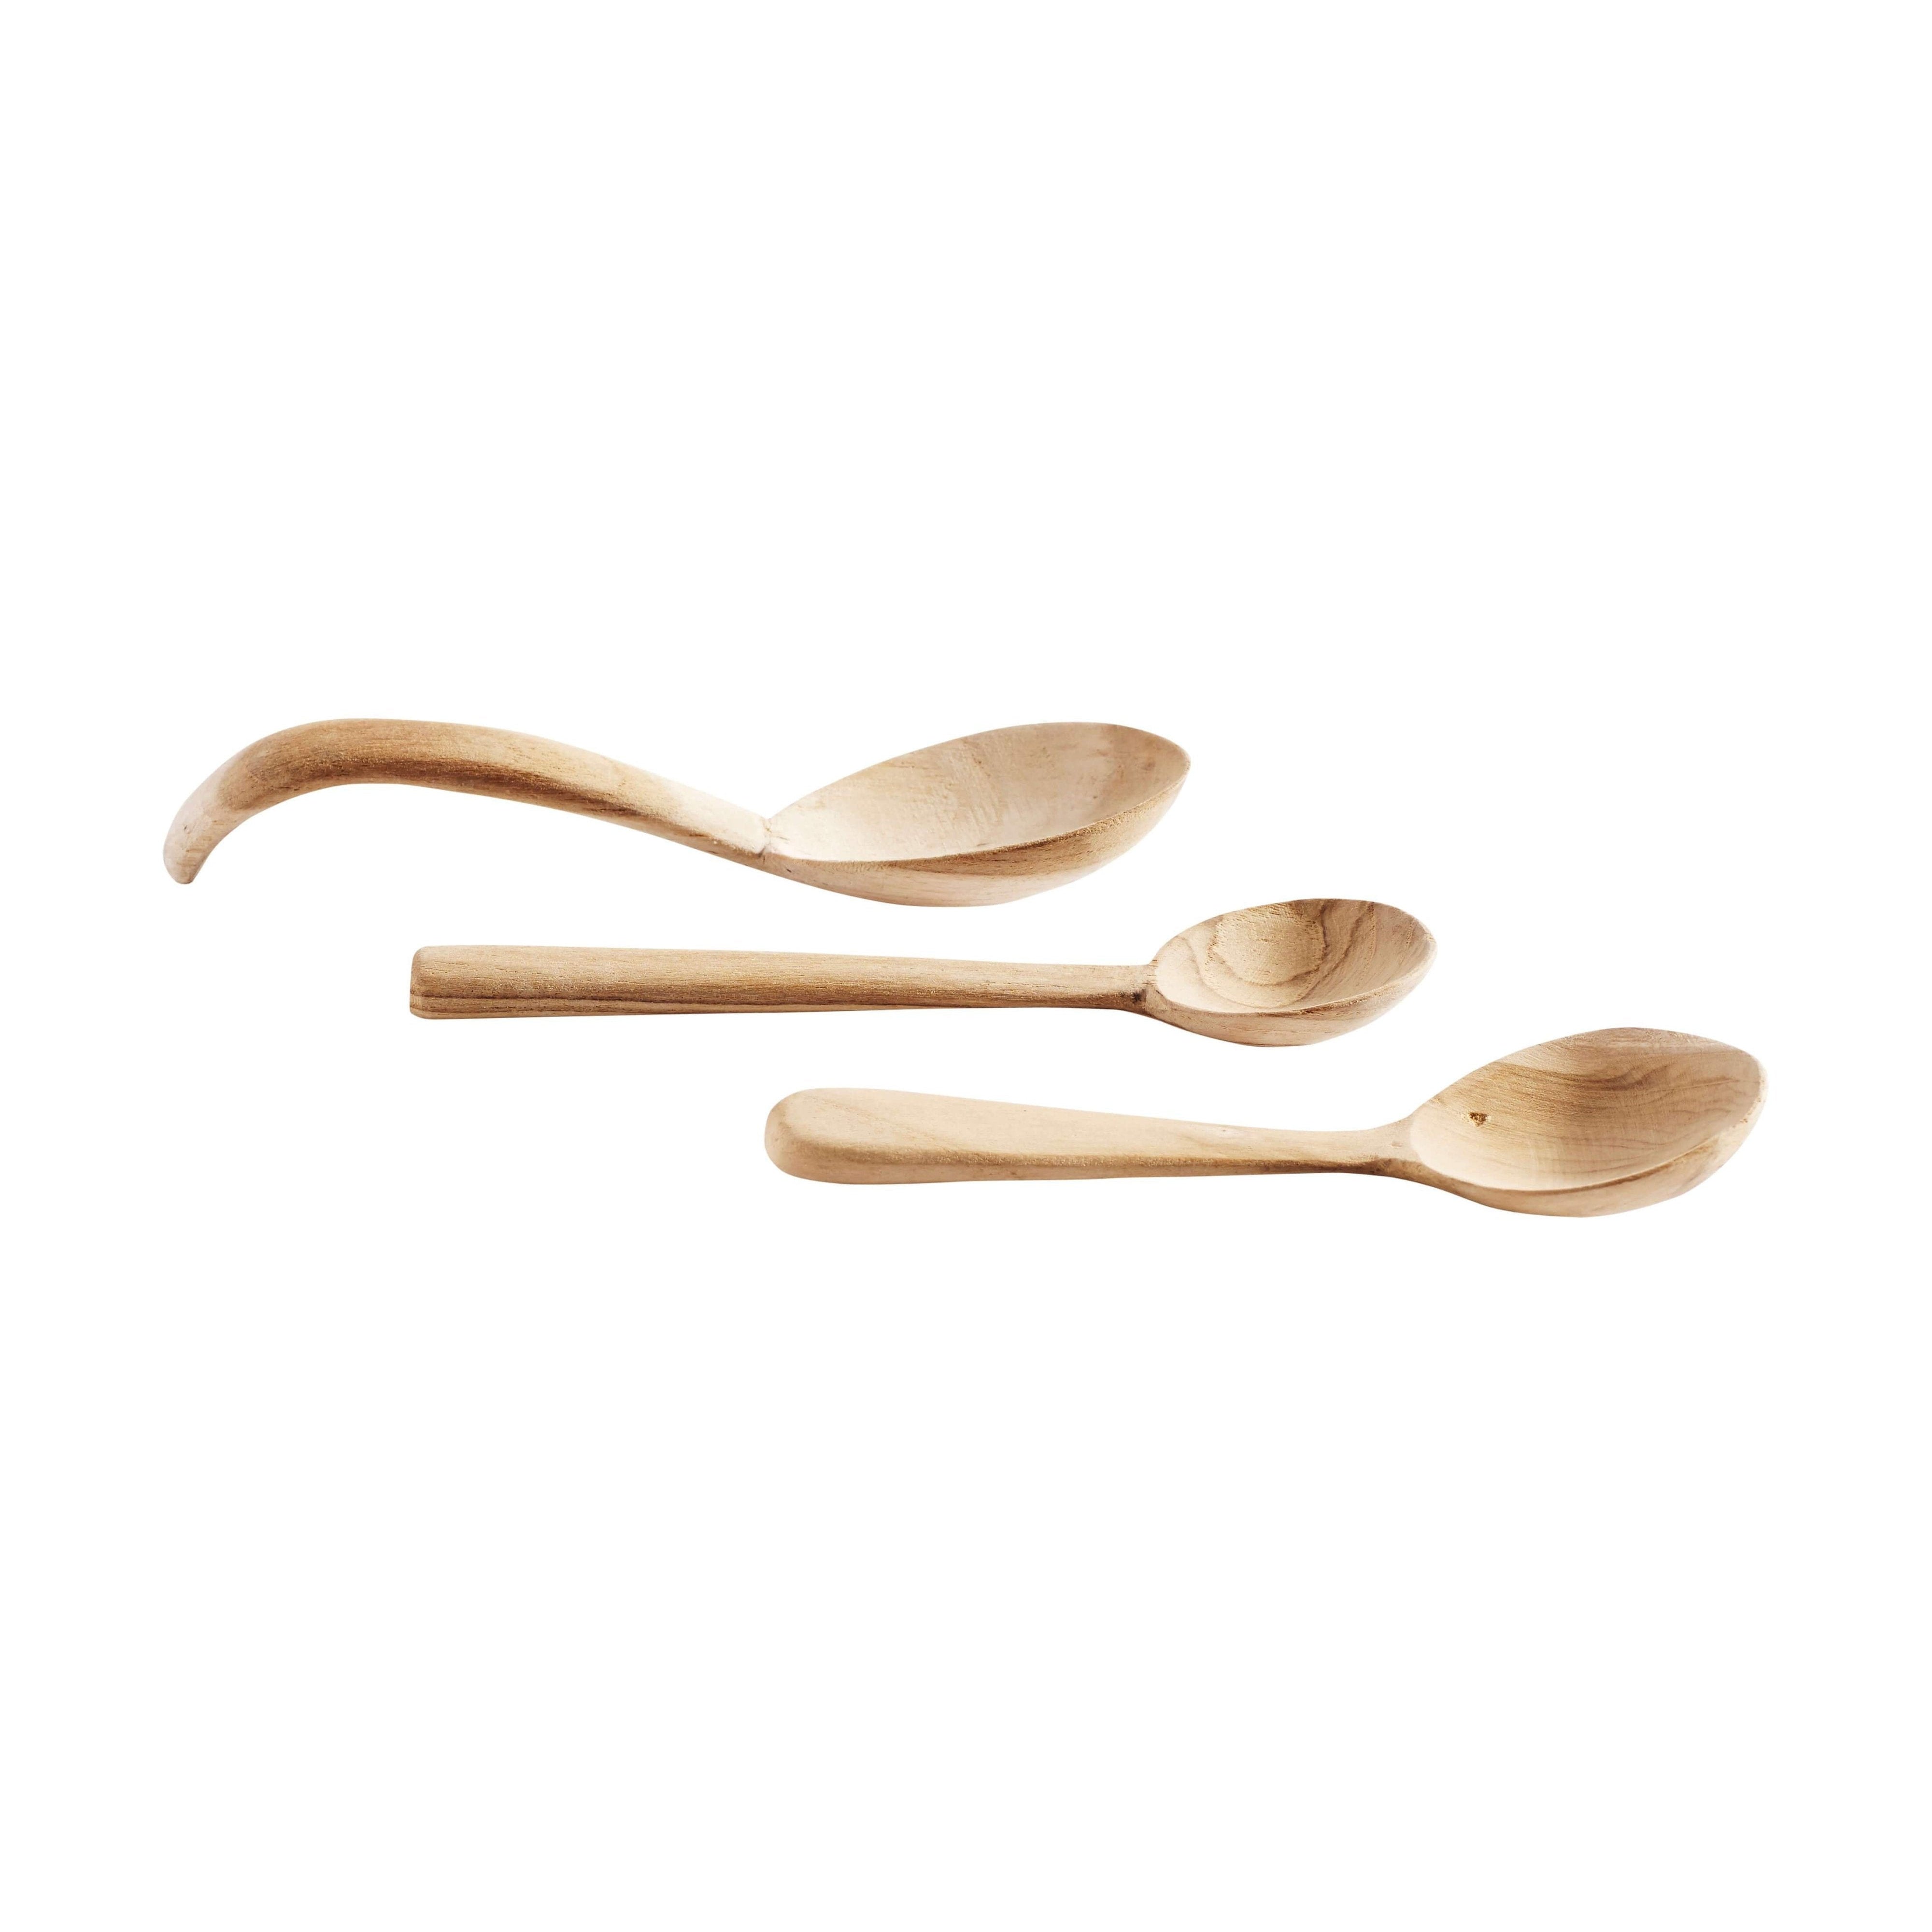 Muubs The Musketeers Spoon, 3pcs.